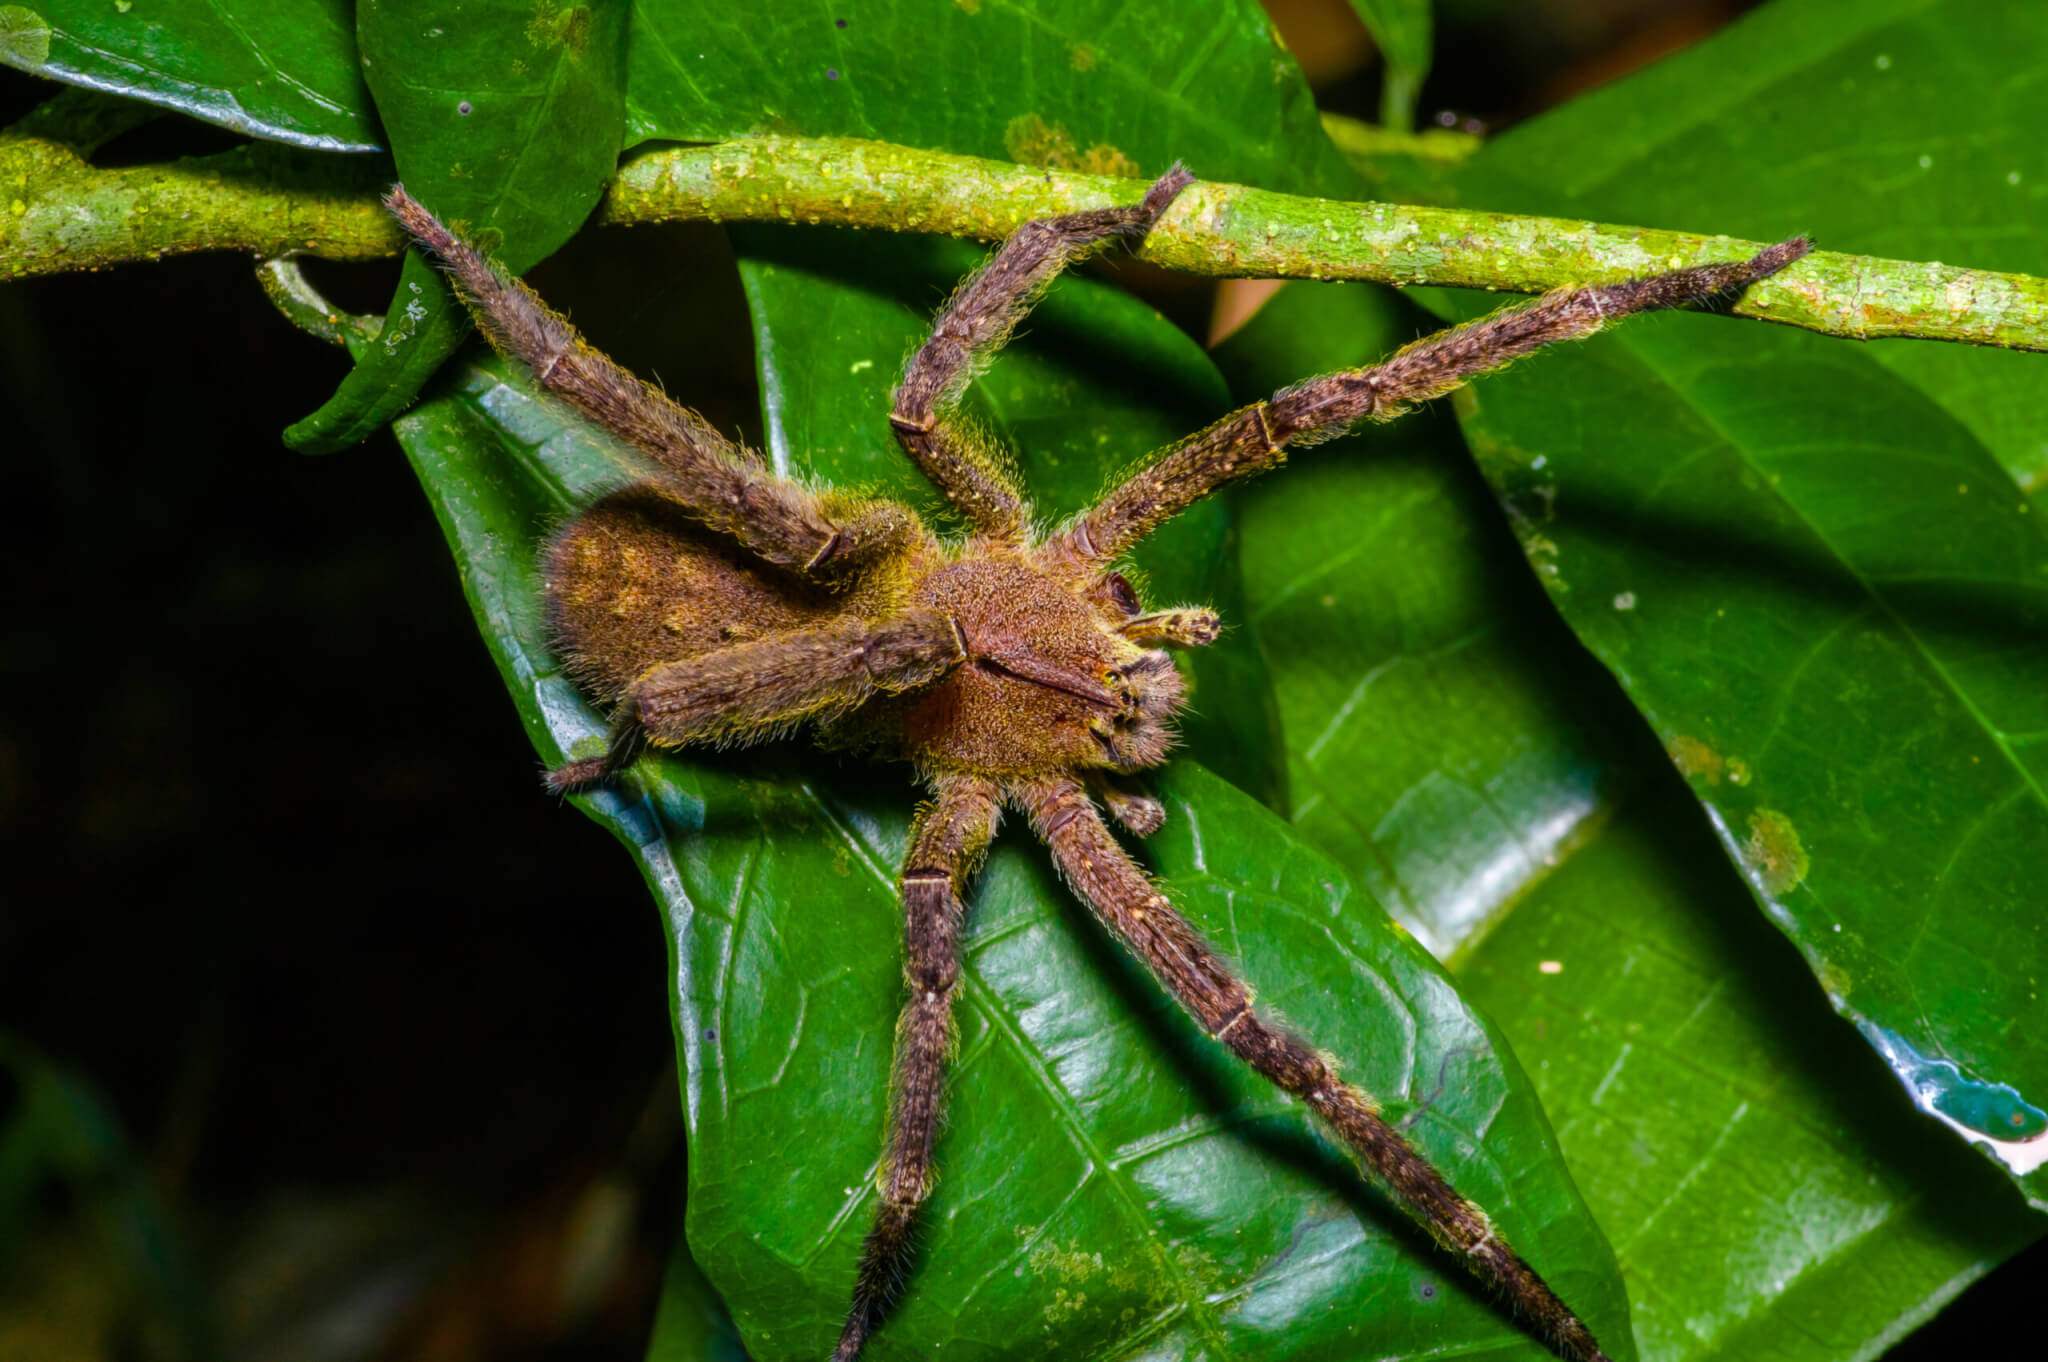 Venomous Brazilian wandering spider sitting on a heliconia leaf. 